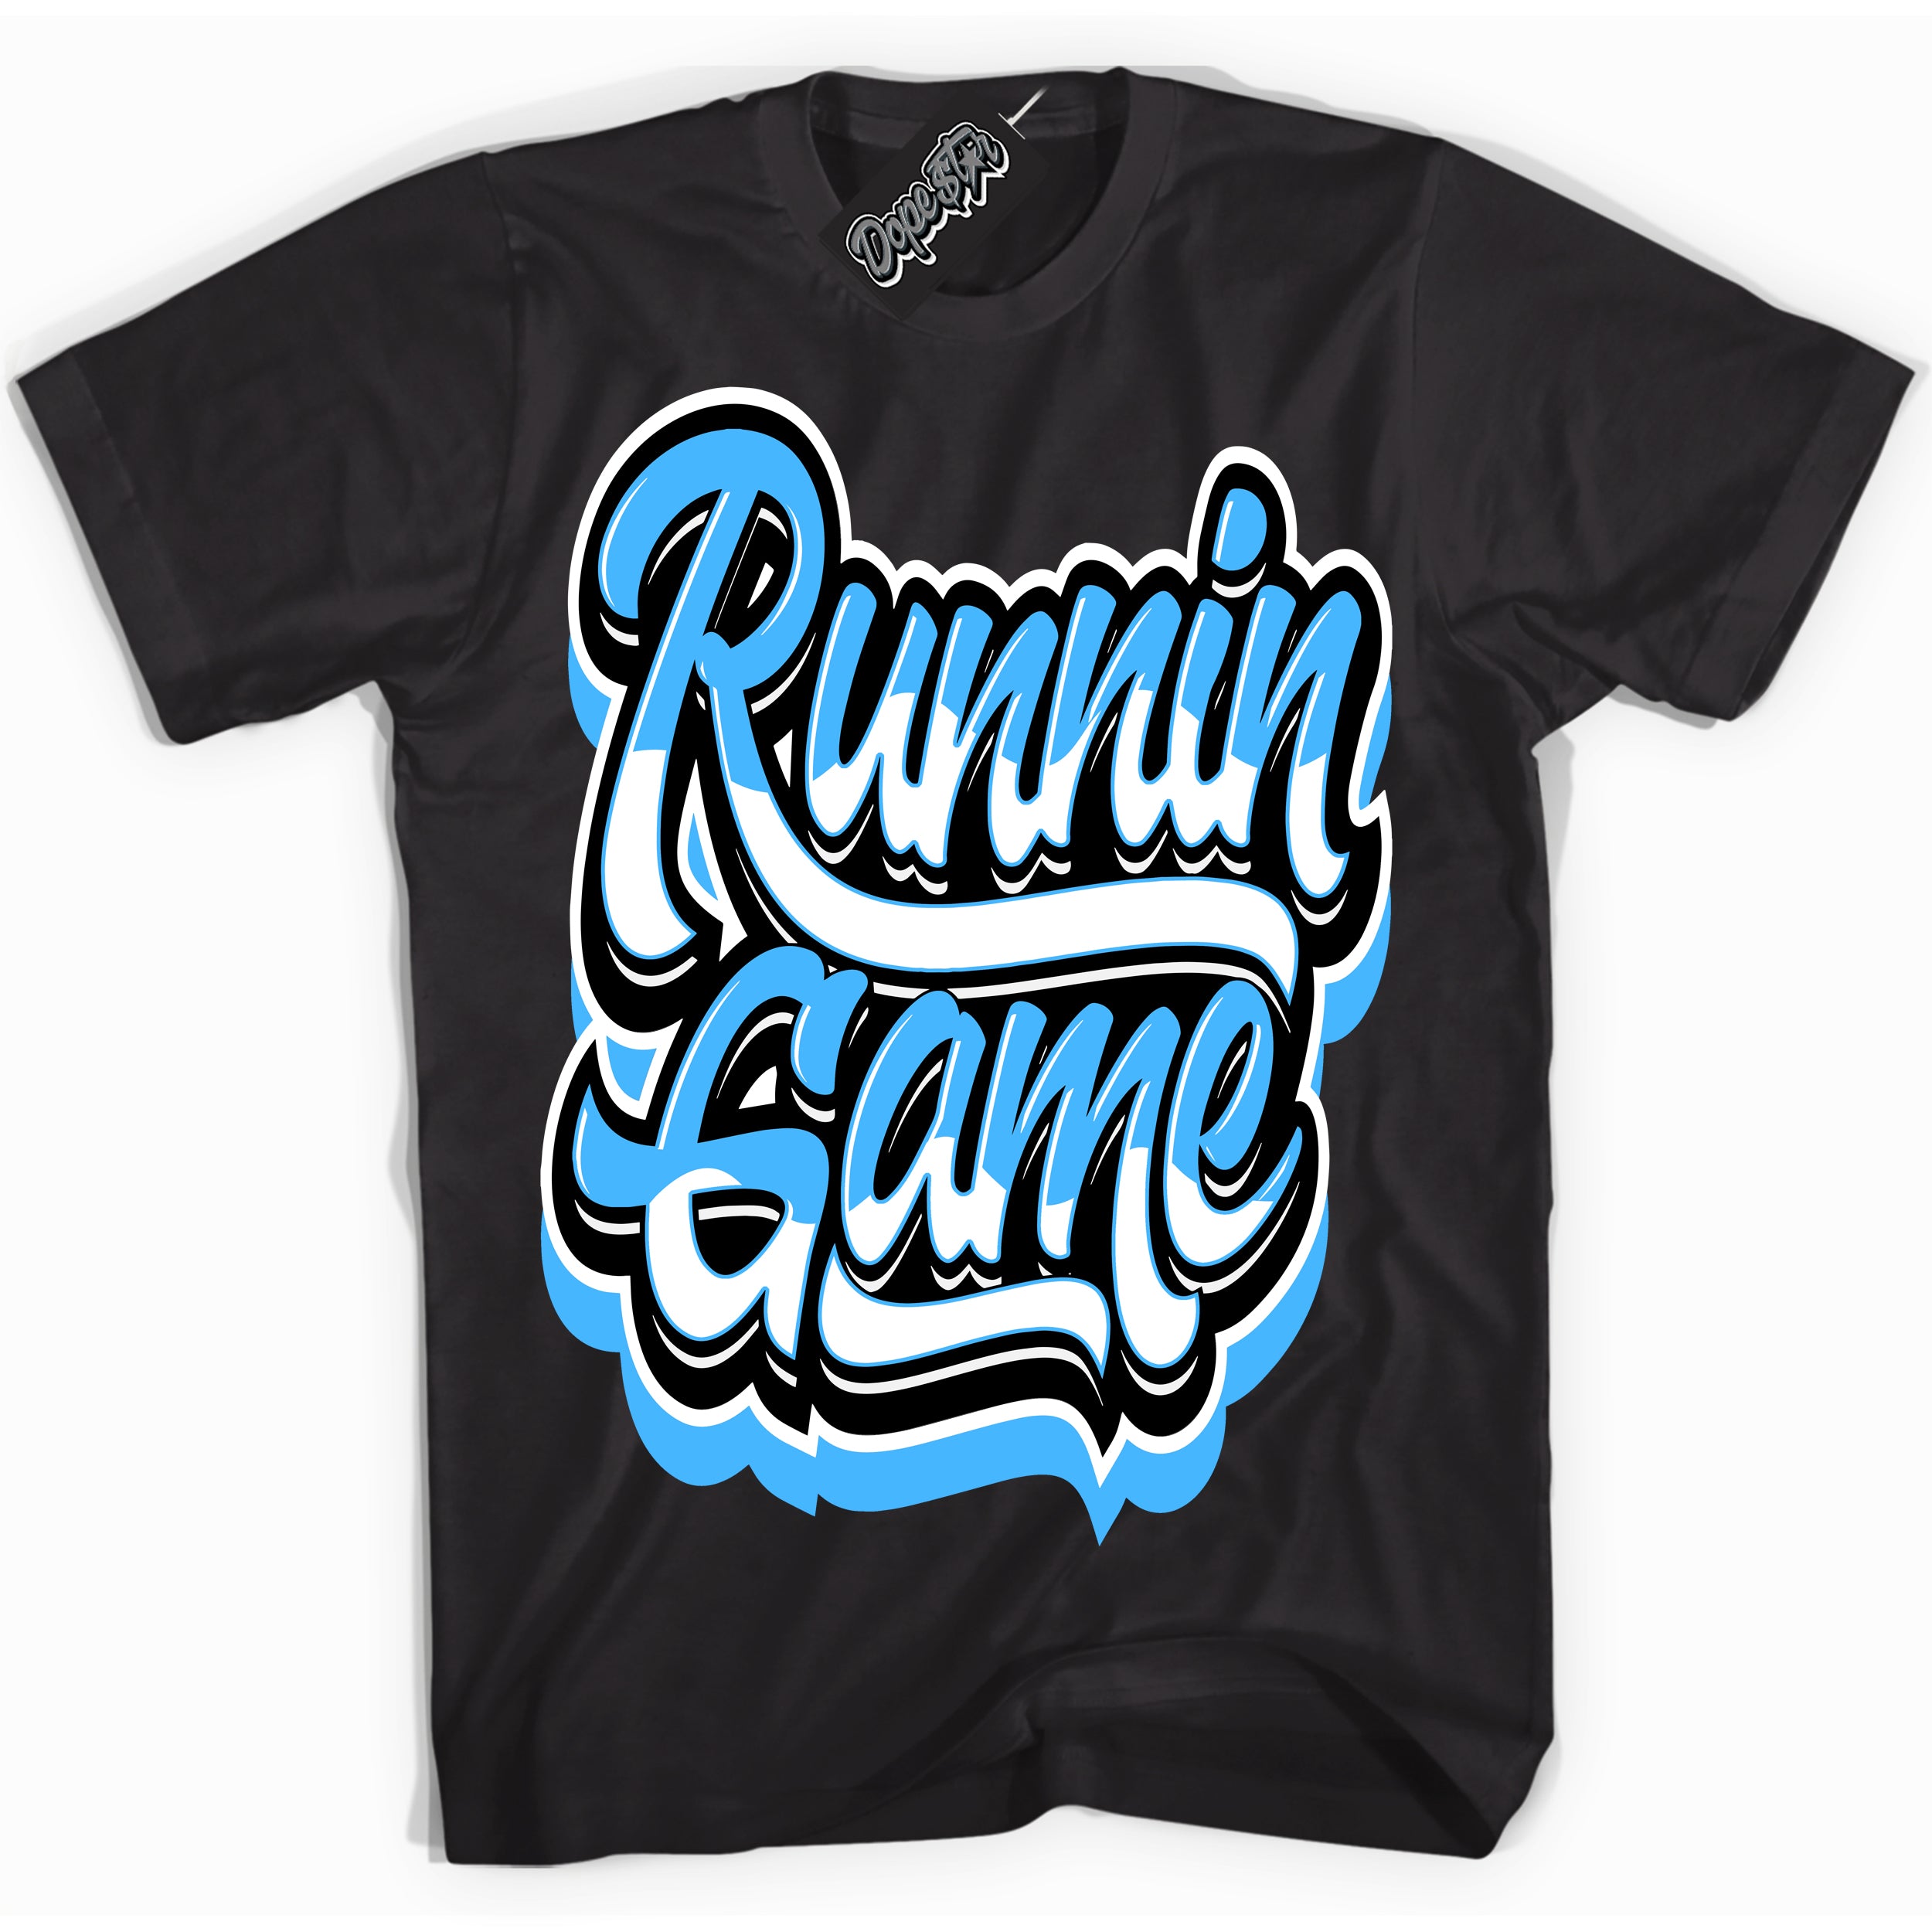 Cool Black graphic tee with “ Running Game” design, that perfectly matches Powder Blue 9s sneakers 